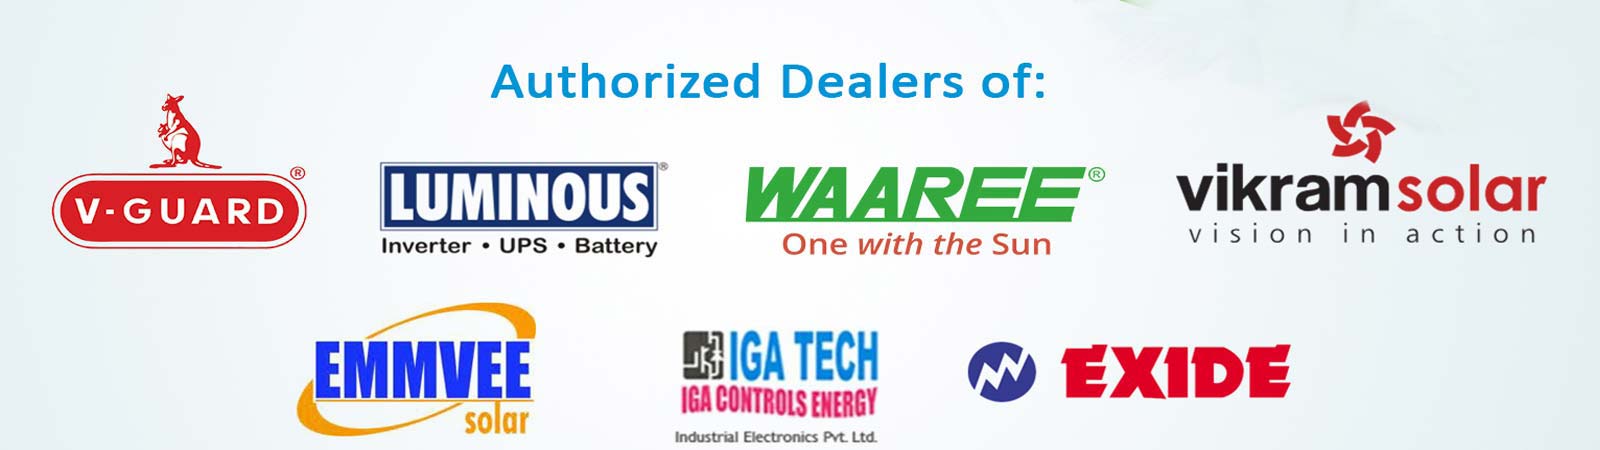 Authorized Dealers of